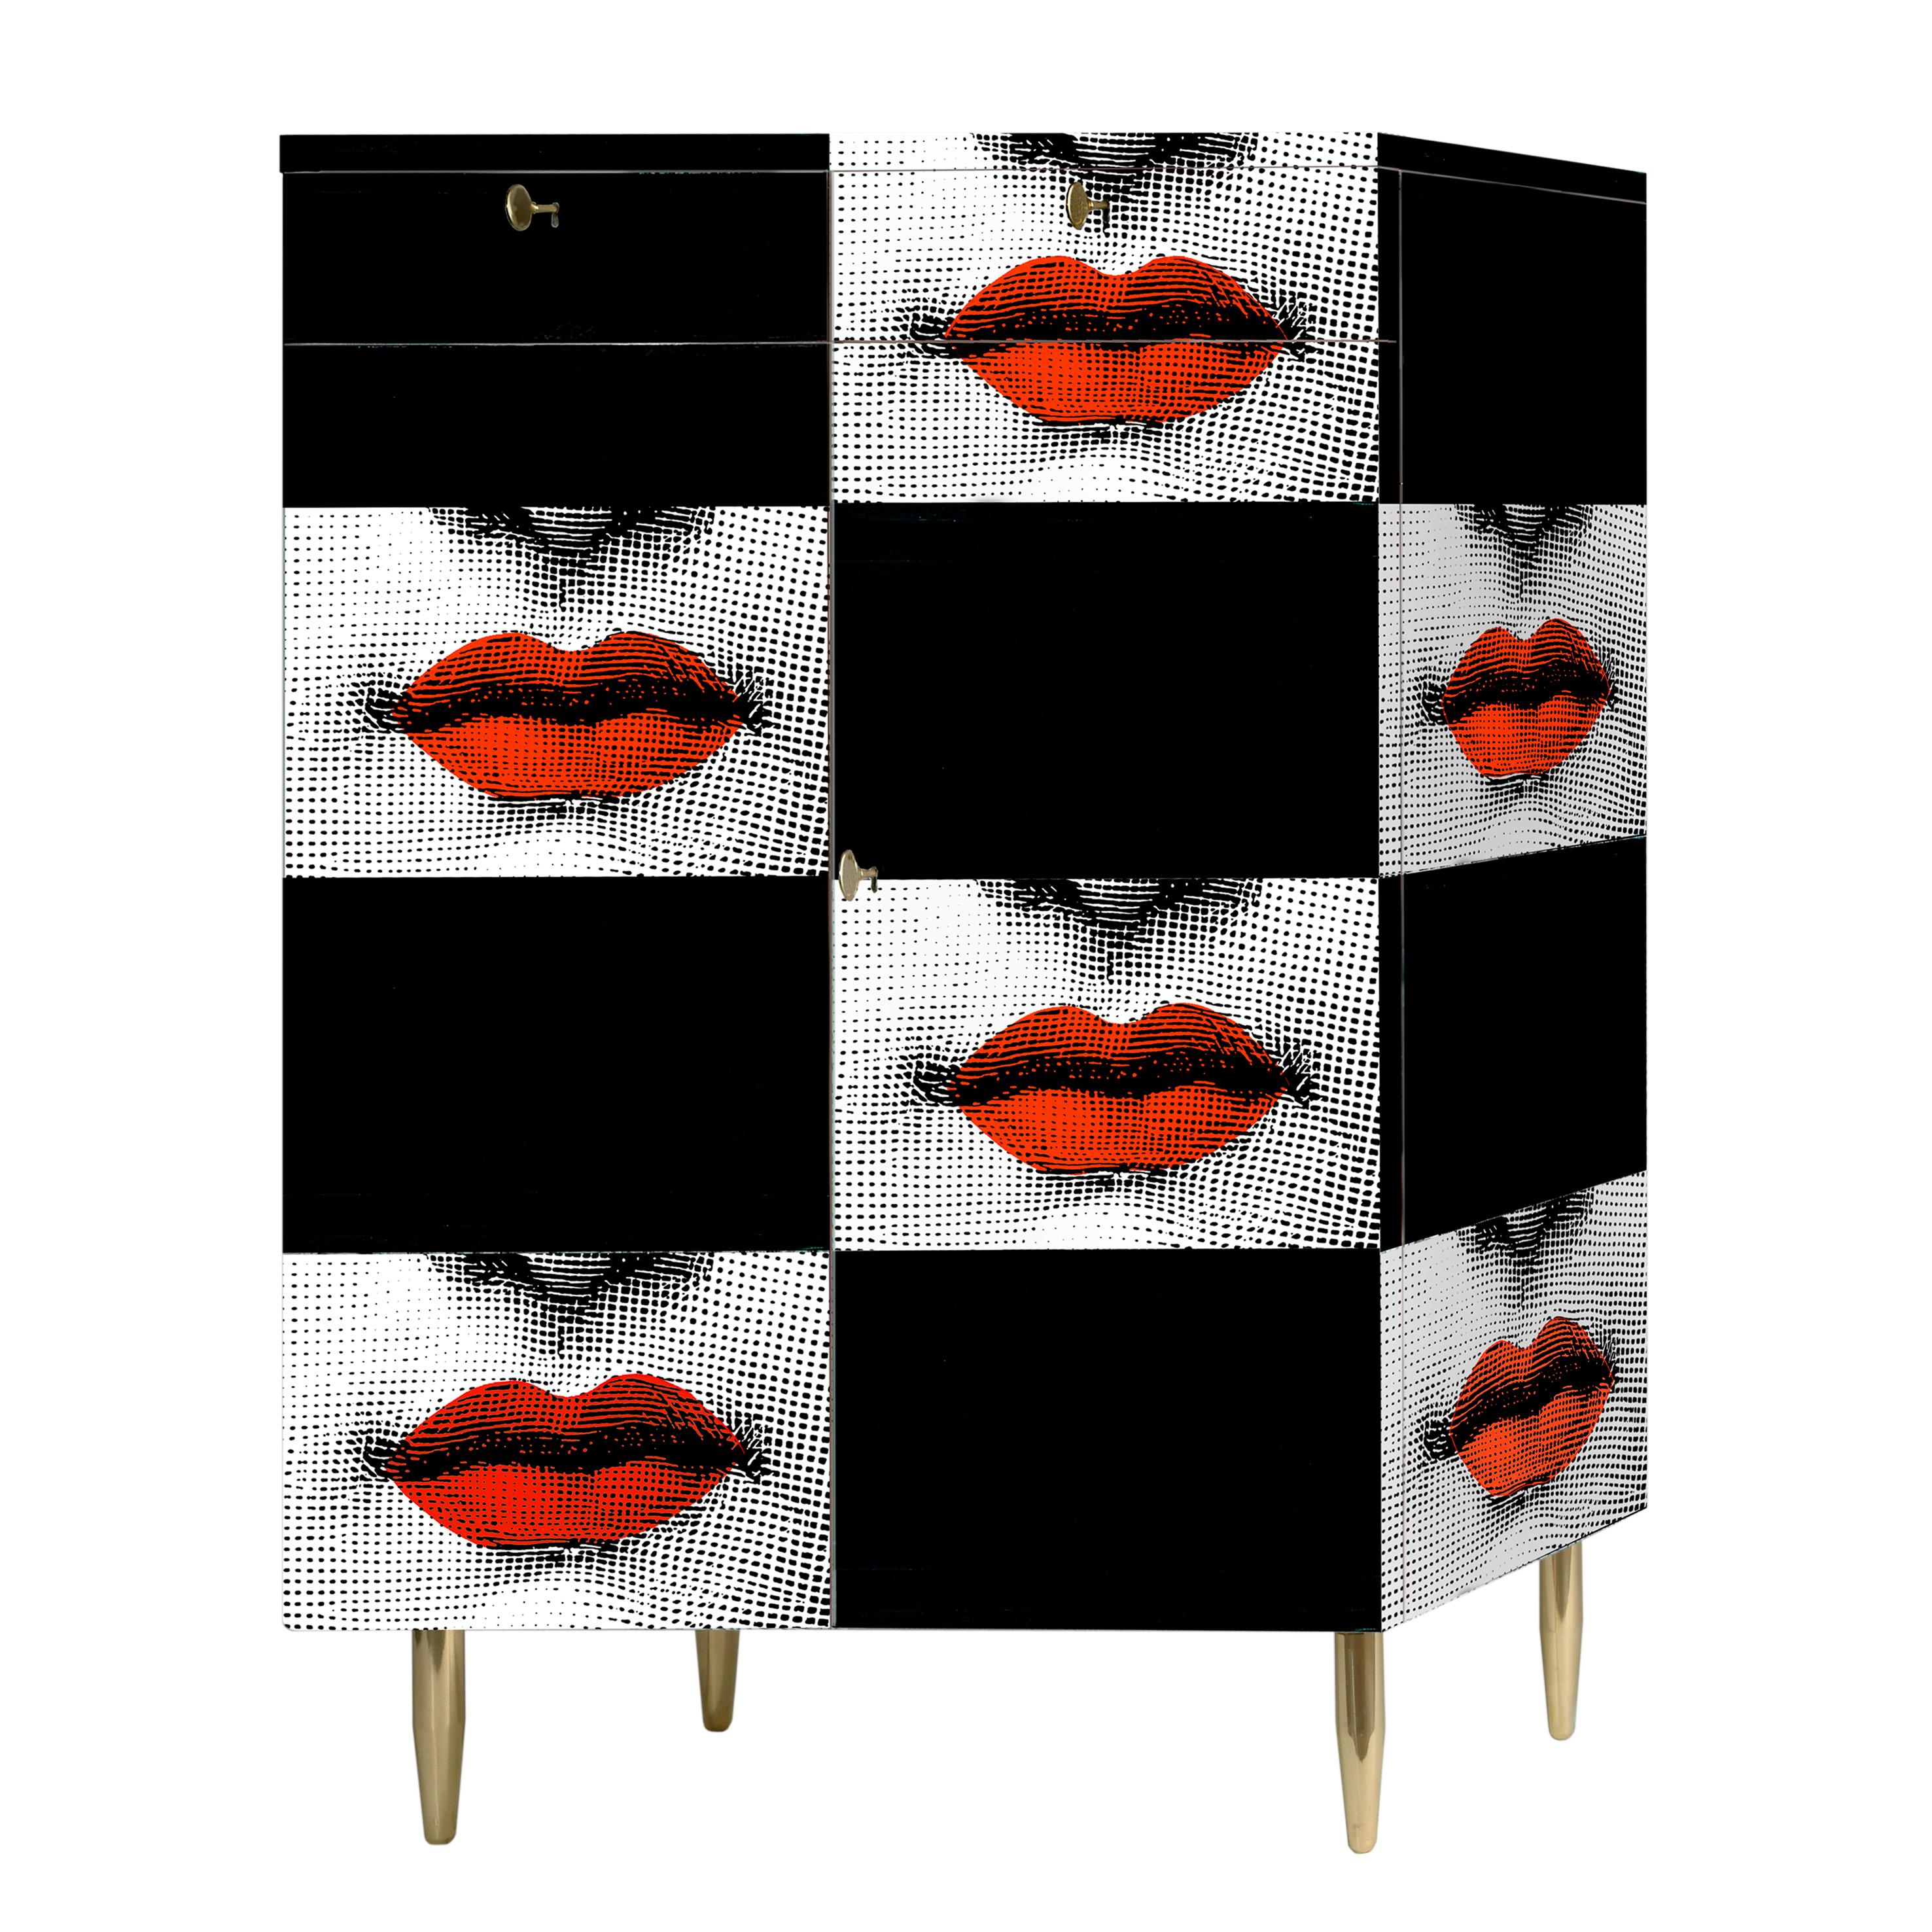 The cabinet is handcrafted using original artisan techniques, like all Fornasetti pieces of furniture, 
This cabinet is silk-screened by hand, hand-finished and covered with a smooth lacquer.

It is a limited edition.

The decoration depicts